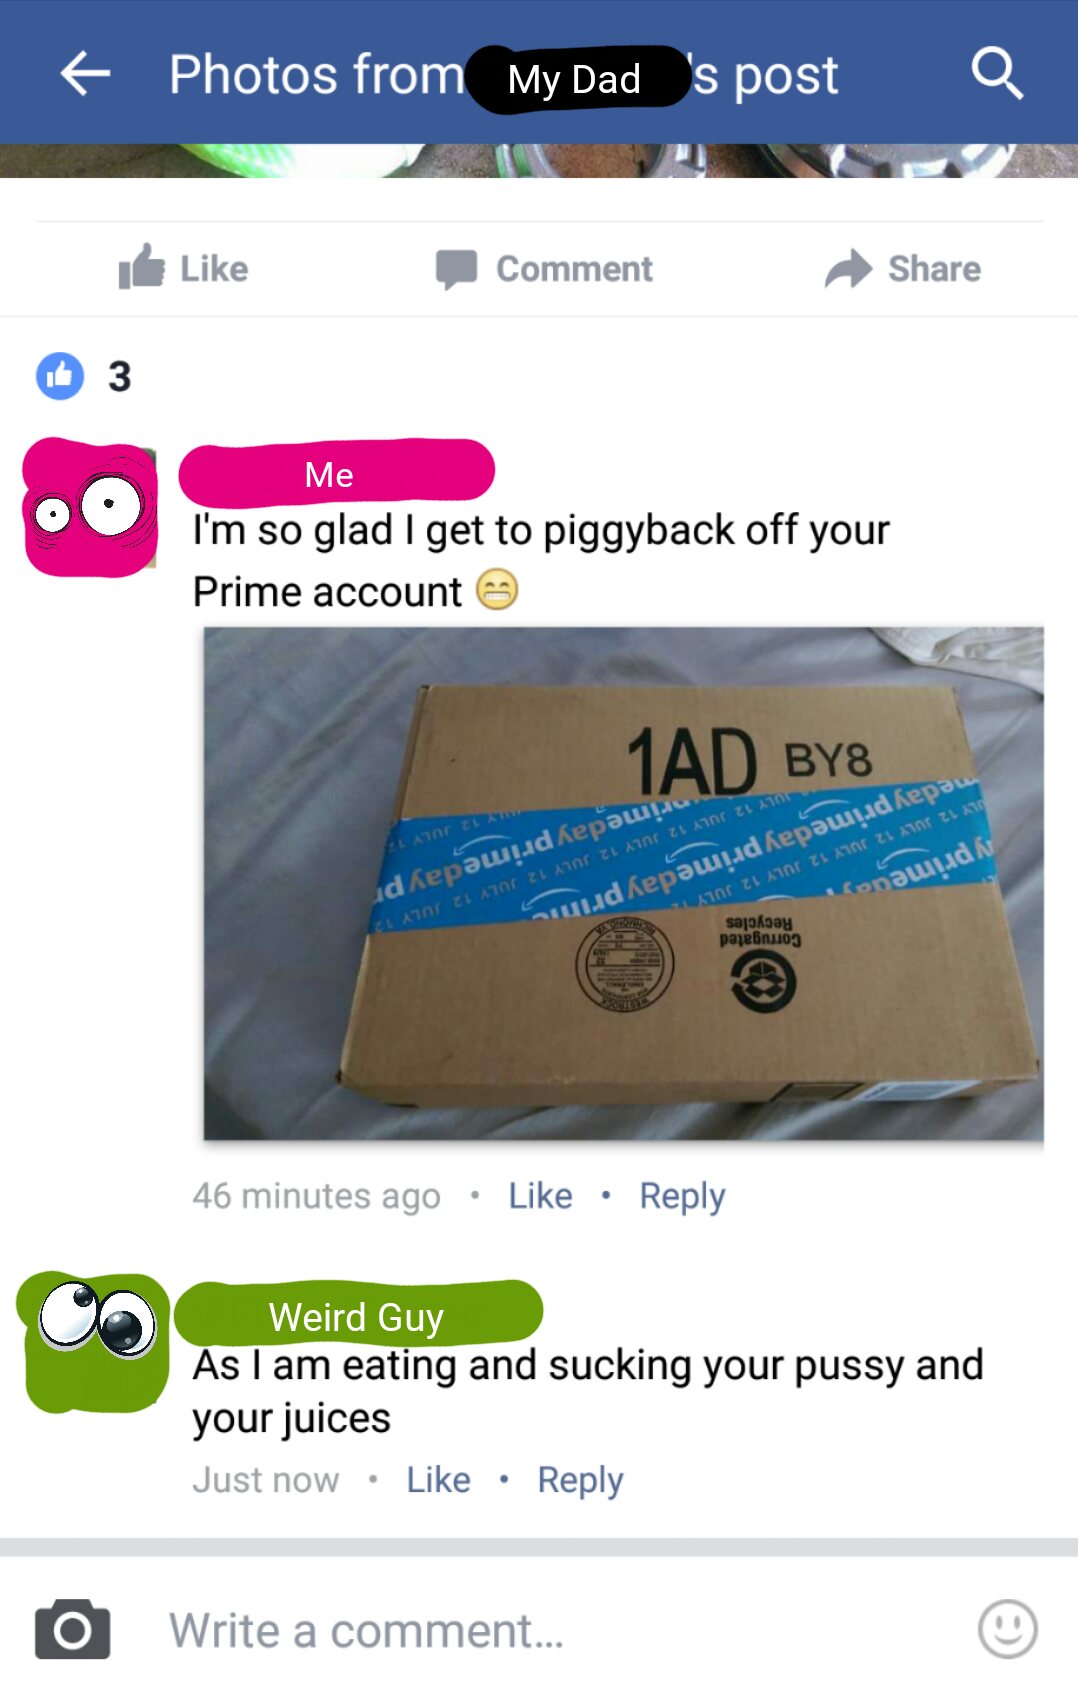 accidental nsfw facebook post - c Photos from My Dad 's post a Comment Me I'm so glad I get to piggyback off your Prime account 1AD BY8 Recycles Corrugated my 12 July 13 rimeday primedaypr July 12 July 12 July 12 July 12 July 12 July 12 meday primedayprim